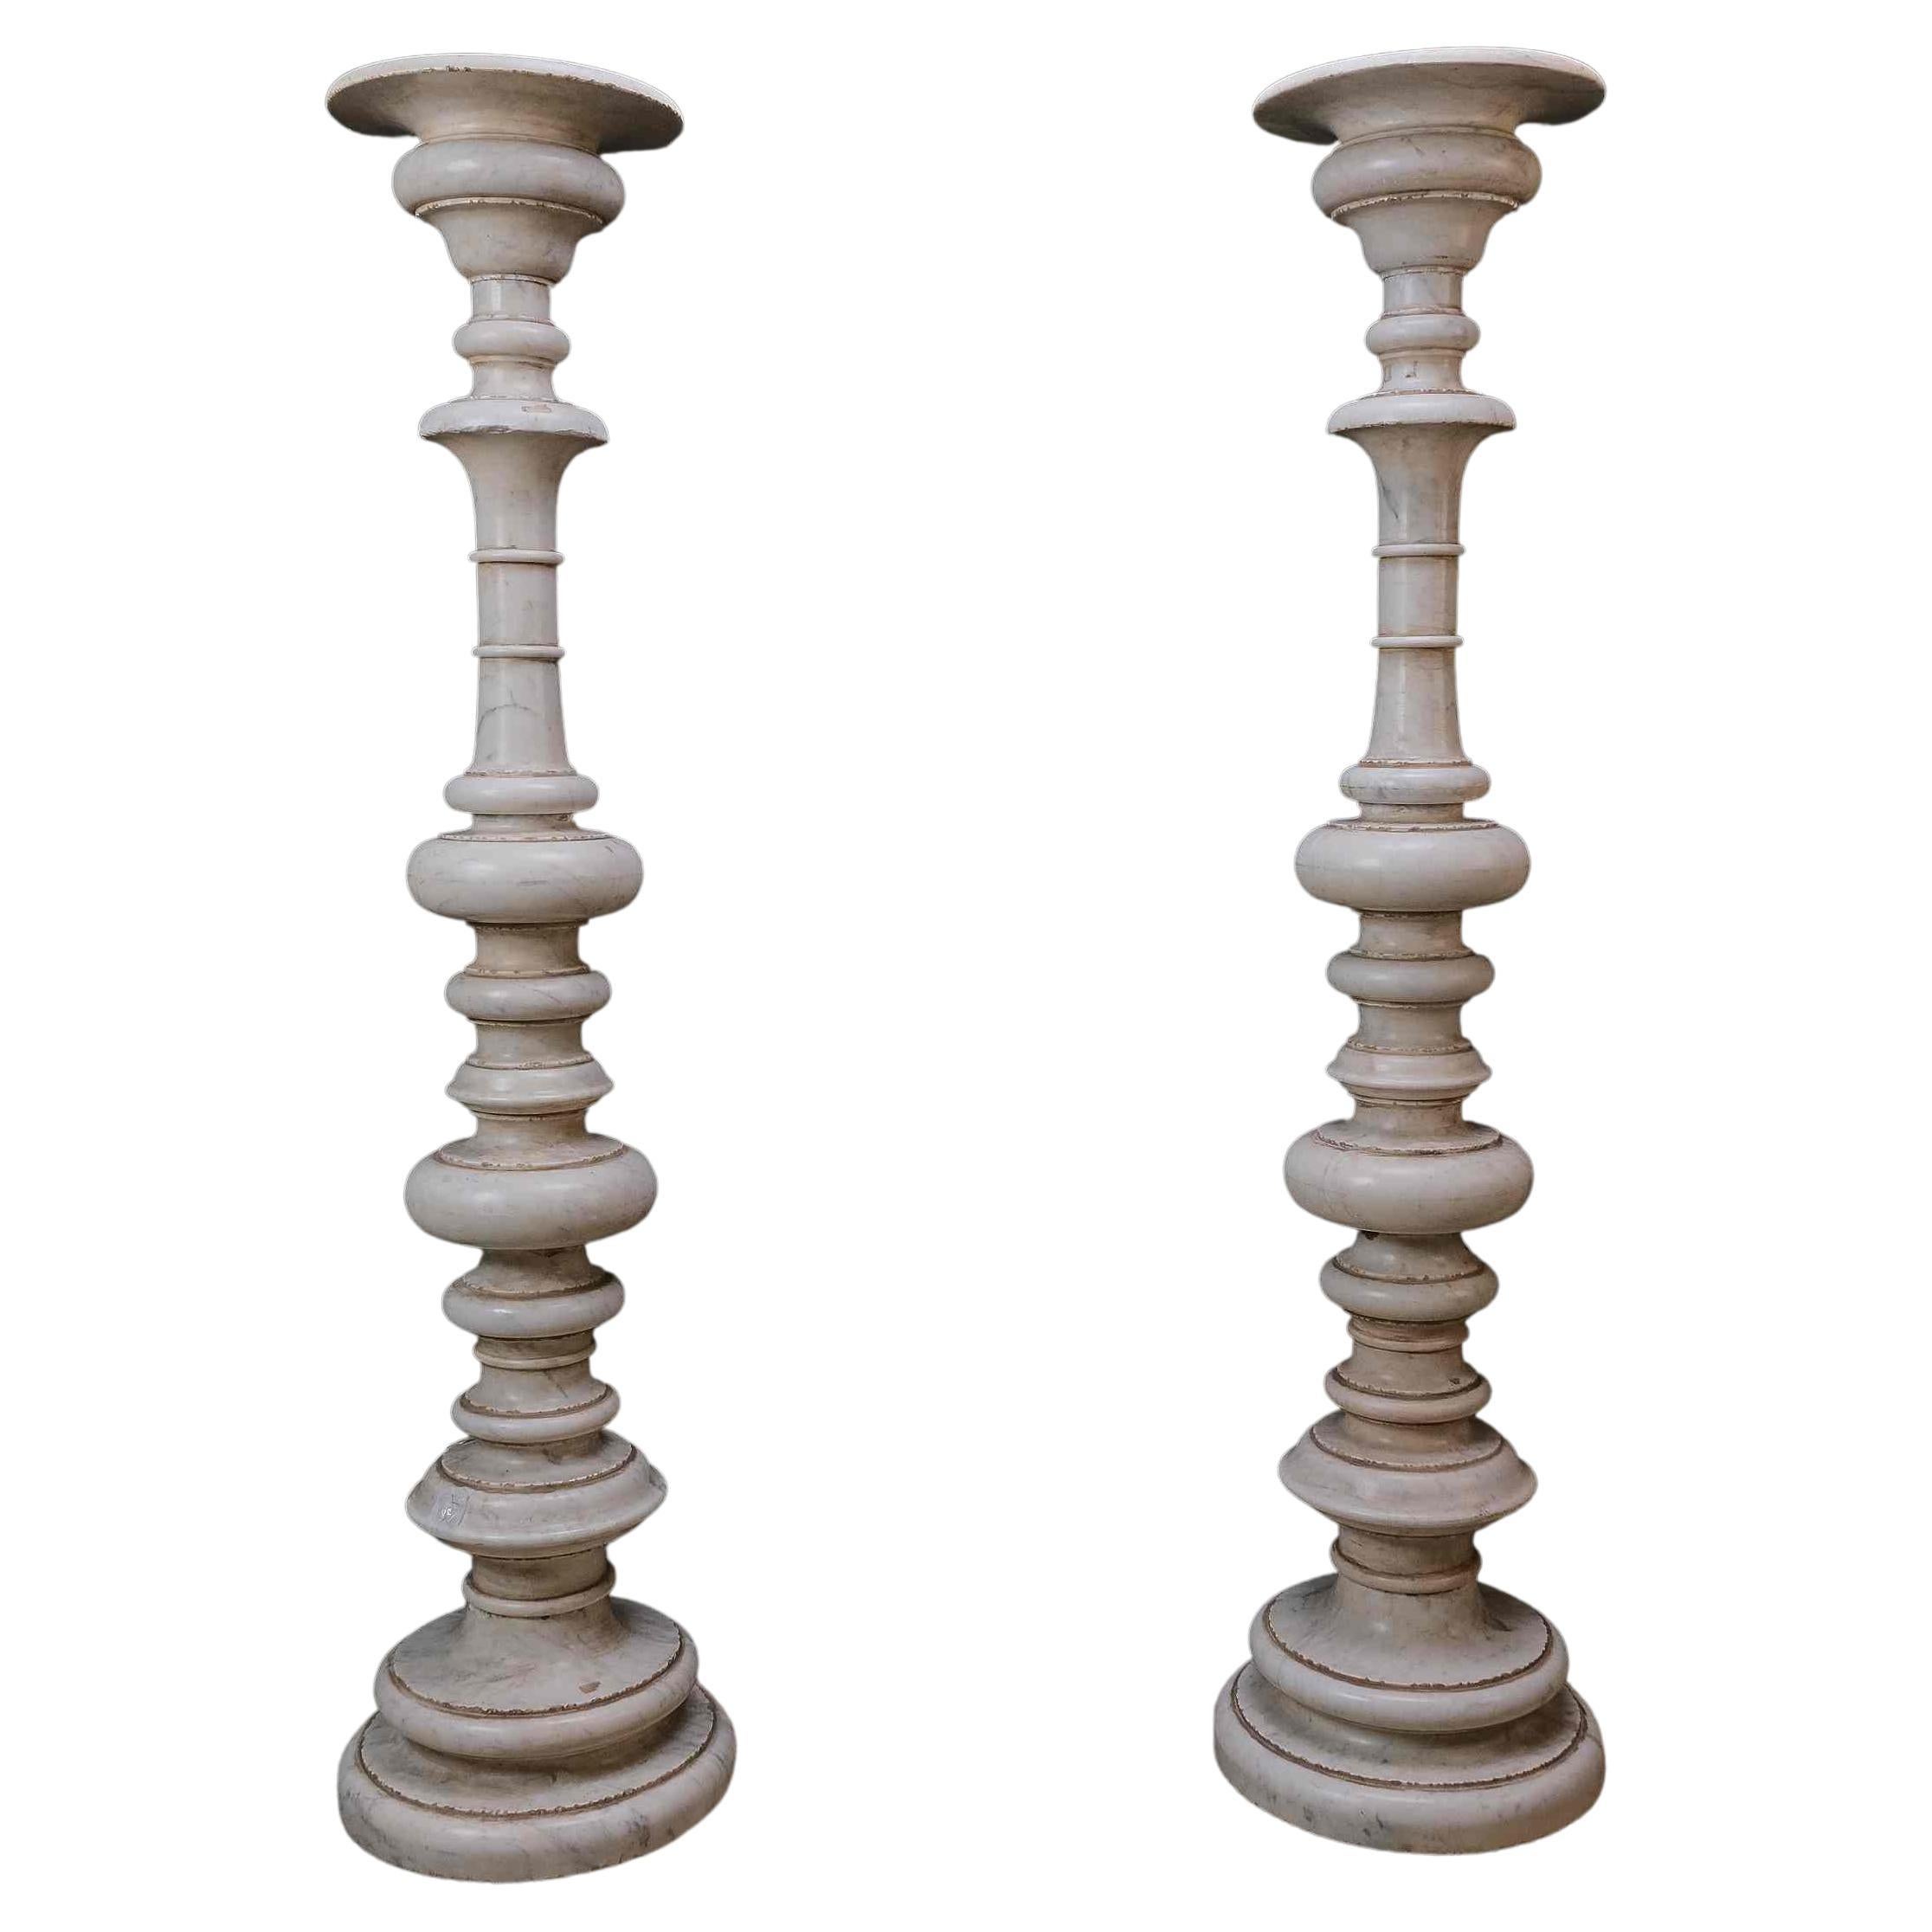 Pair of Monumental Carrara Marble Candlesticks, Rome, 17th Century For Sale